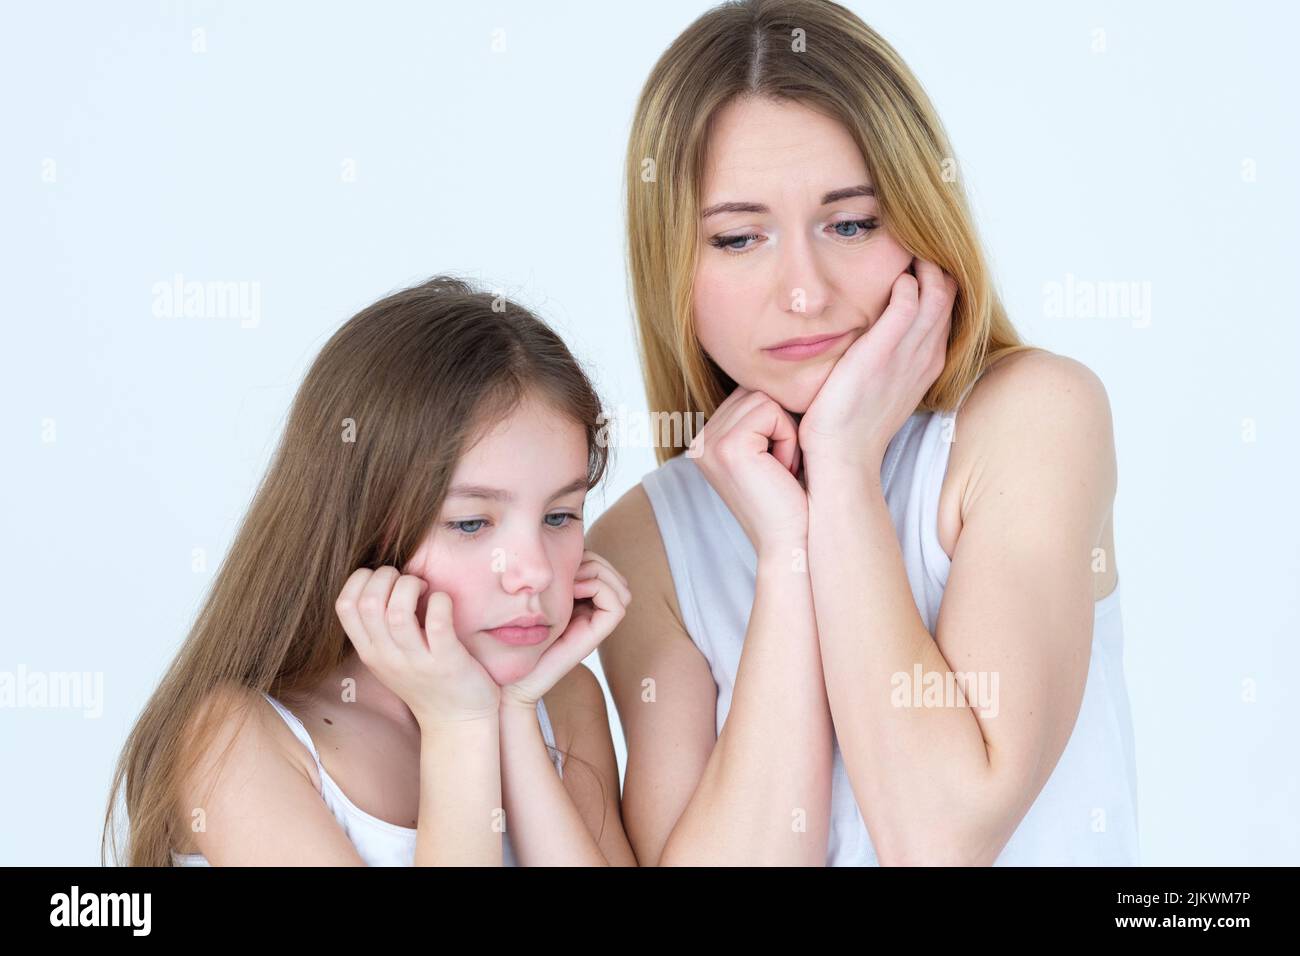 sad pensive mother daughter waiting missing family Stock Photo